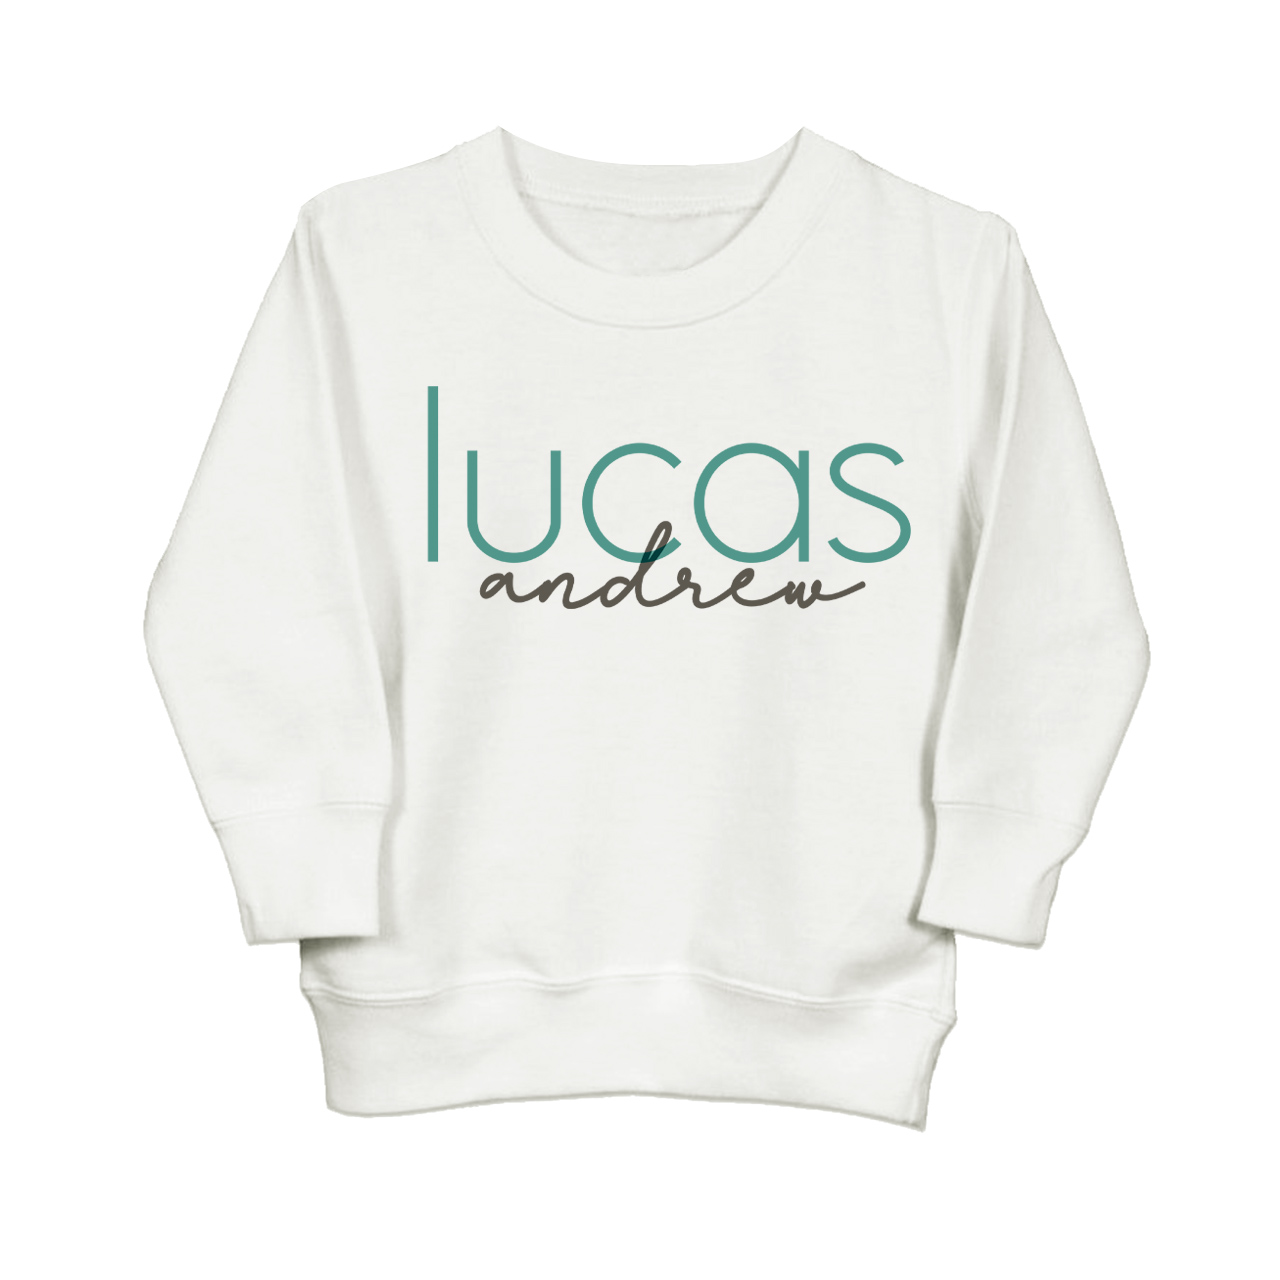 Personalized Name Sweatshirt For Kids